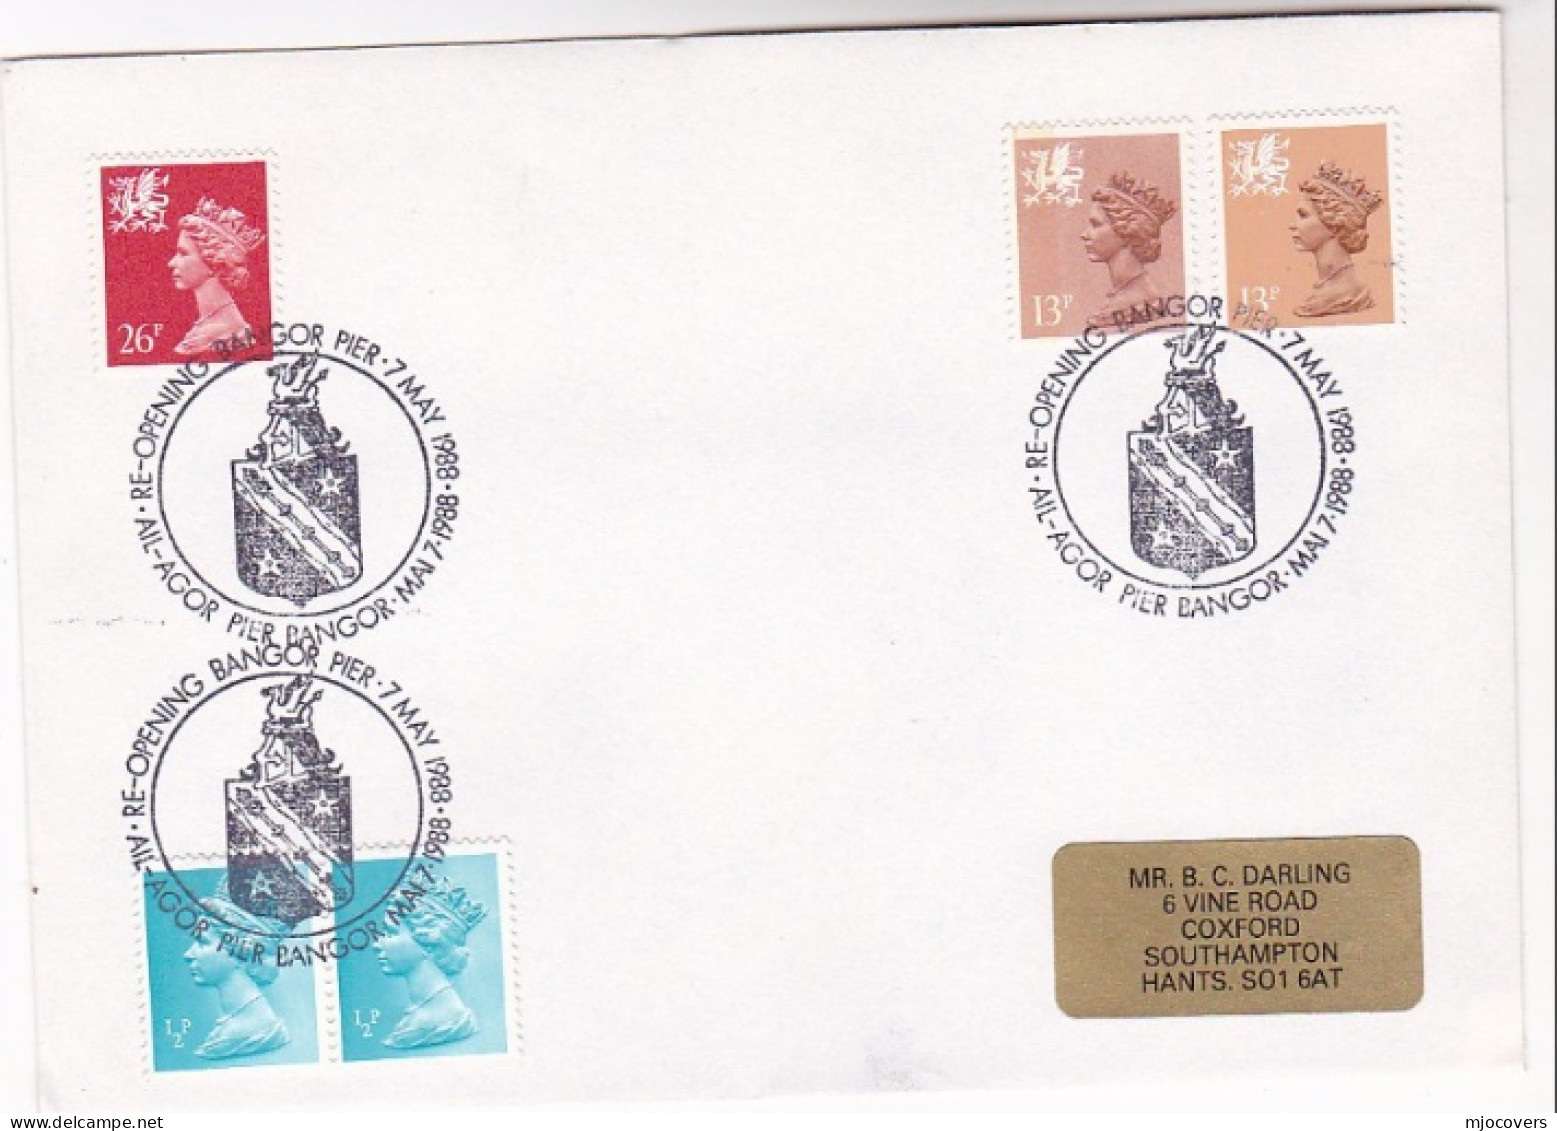 1988 BANGOR PIER Reopens EVENT COVER Dragon Coat Of Arms Wales GB Stamps - Mythology